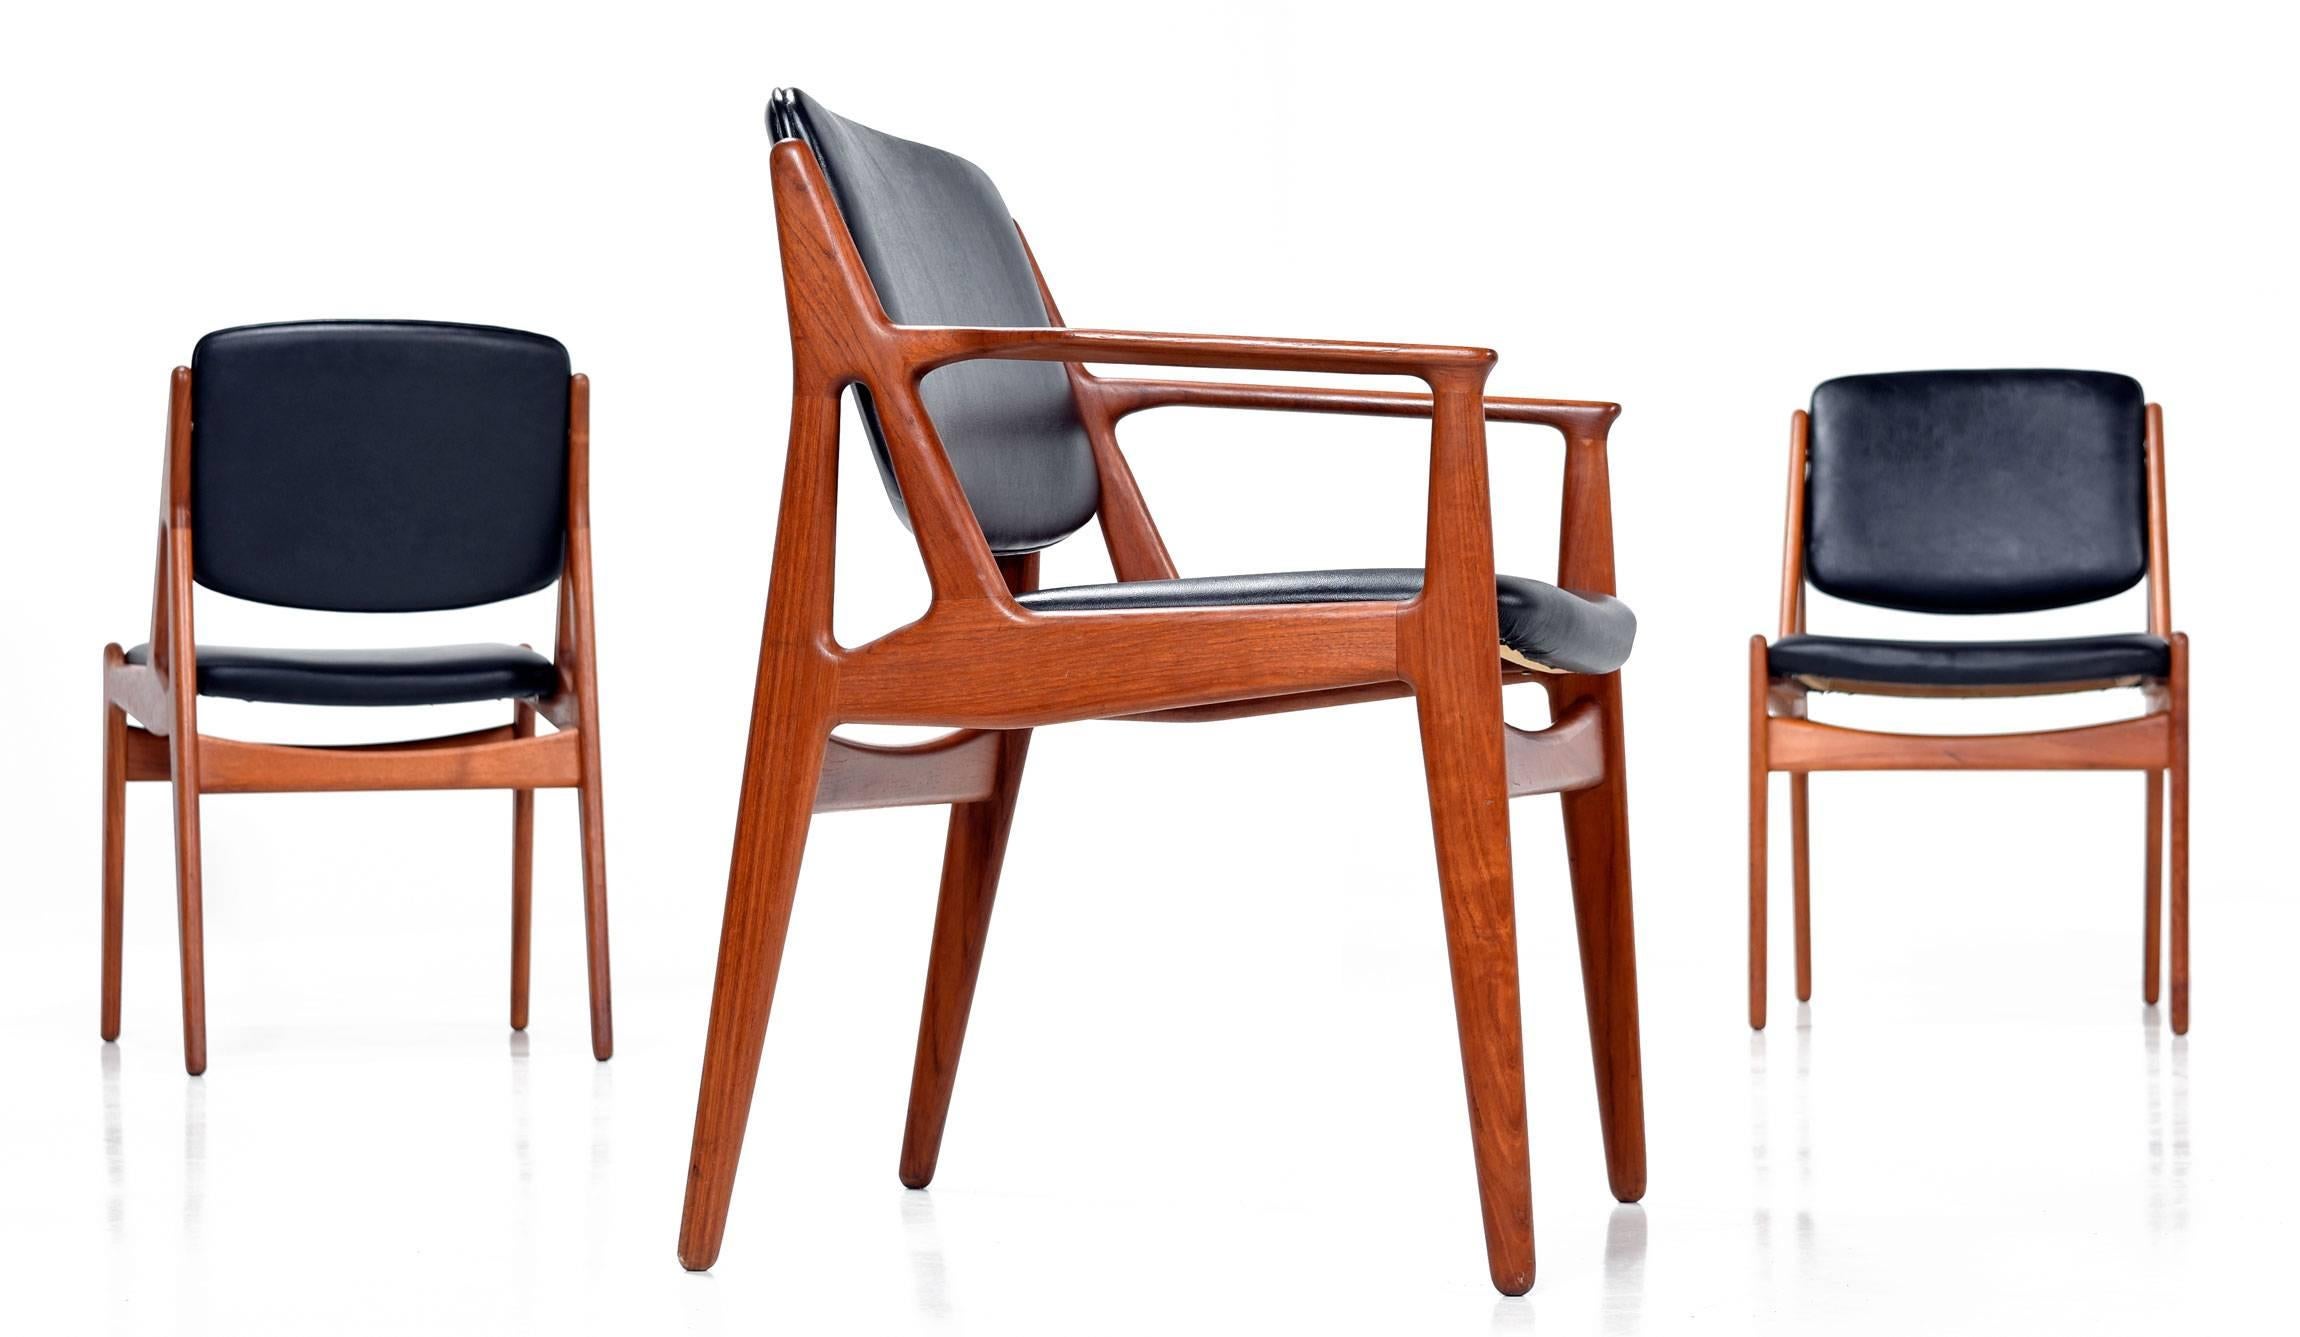 Set of six Mid-Century Modern Danish teak dining chairs designed by Arne Vodder for Vamo Sonderborg. The chairs have been restored with all new high quality vinyl upholstery matching original factory spec. New webbing supports and foam have been